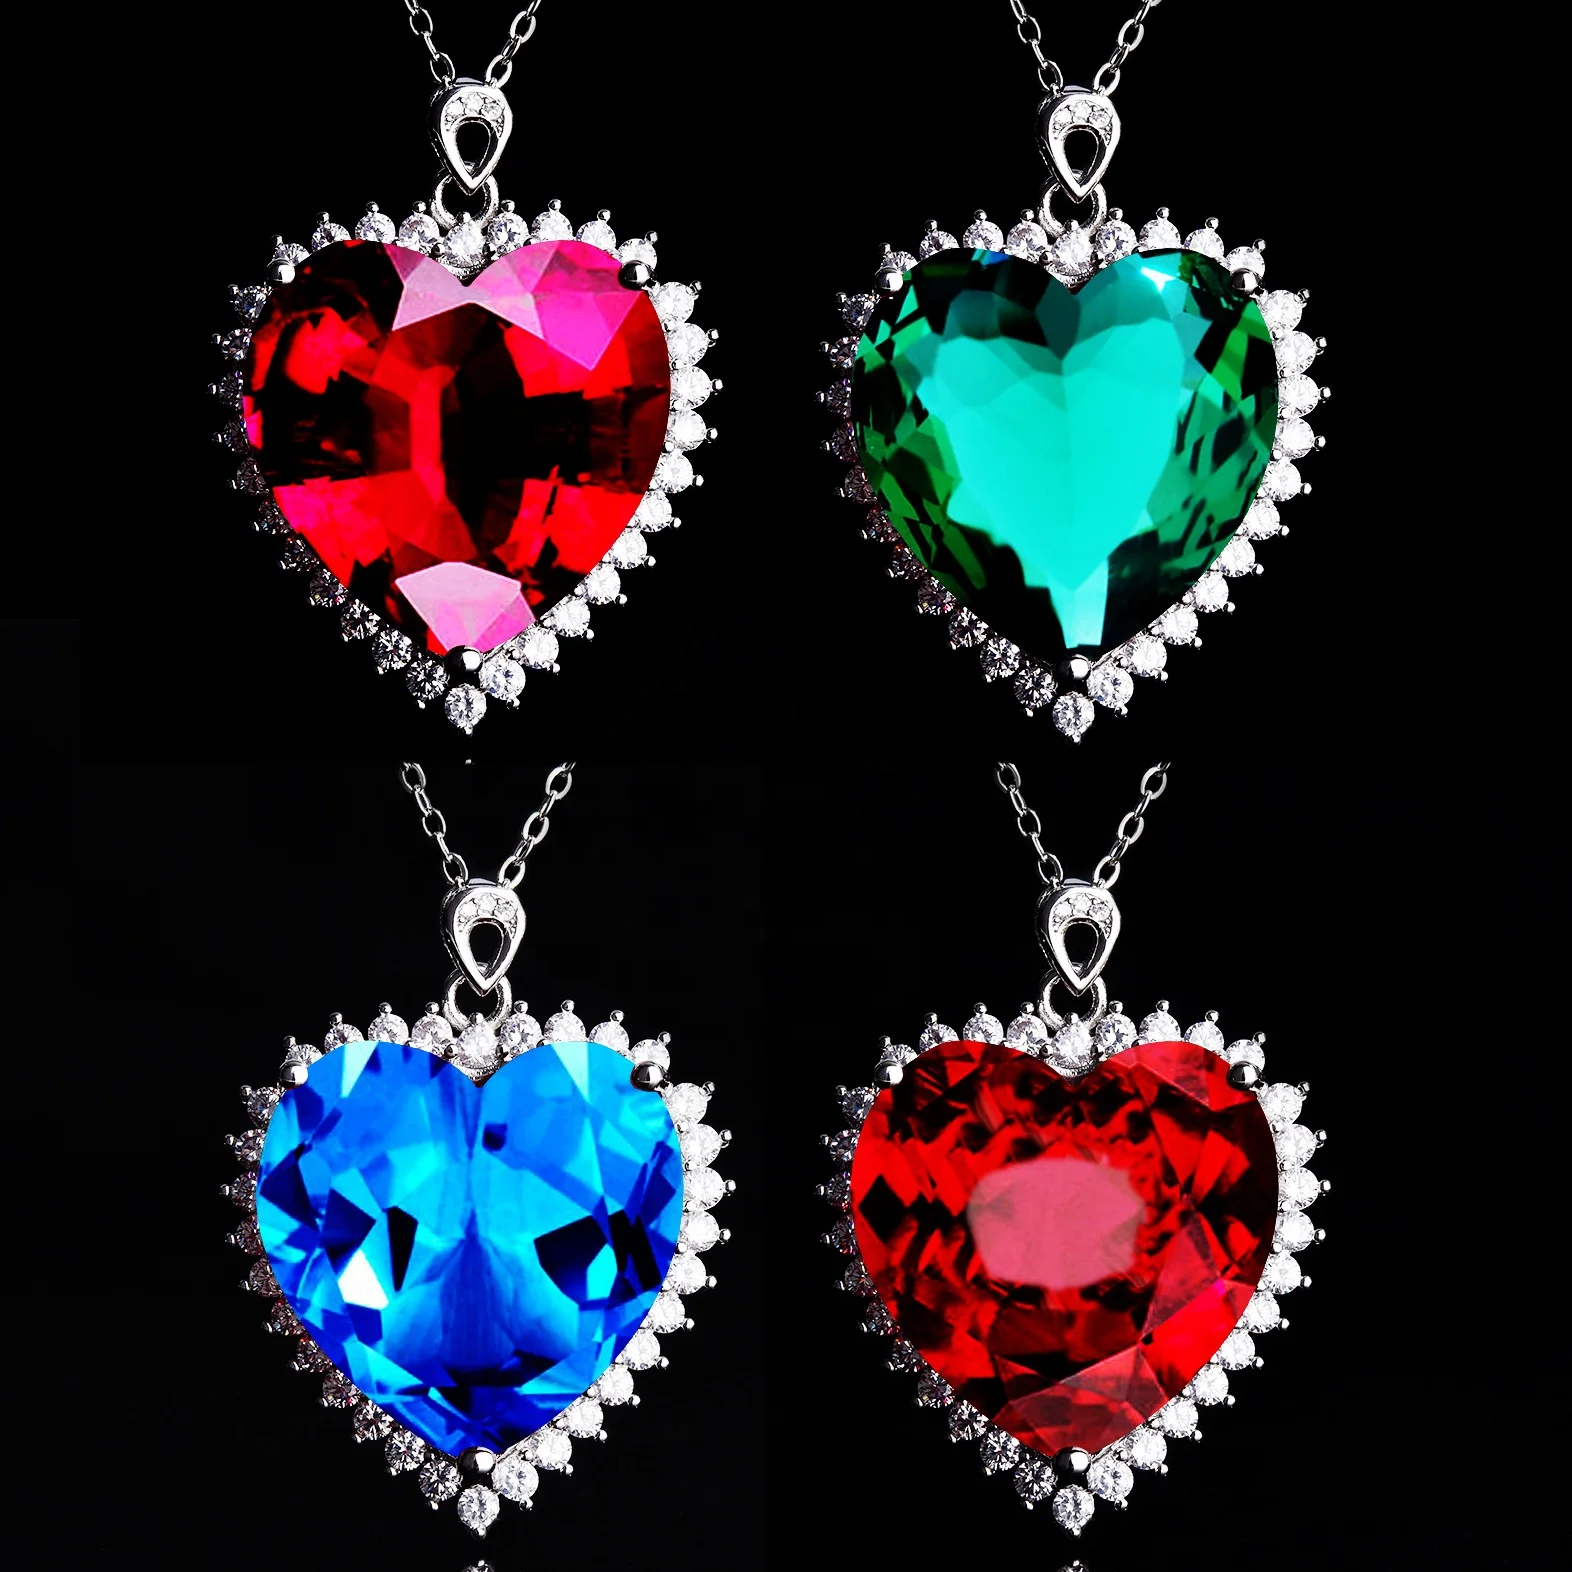 

New Heart Zircon Pendant Necklace Fashion Romantic Heart Of The Ocean For Women Promise Wedding Jewelry Charm Clavicle Chain, Picture shows